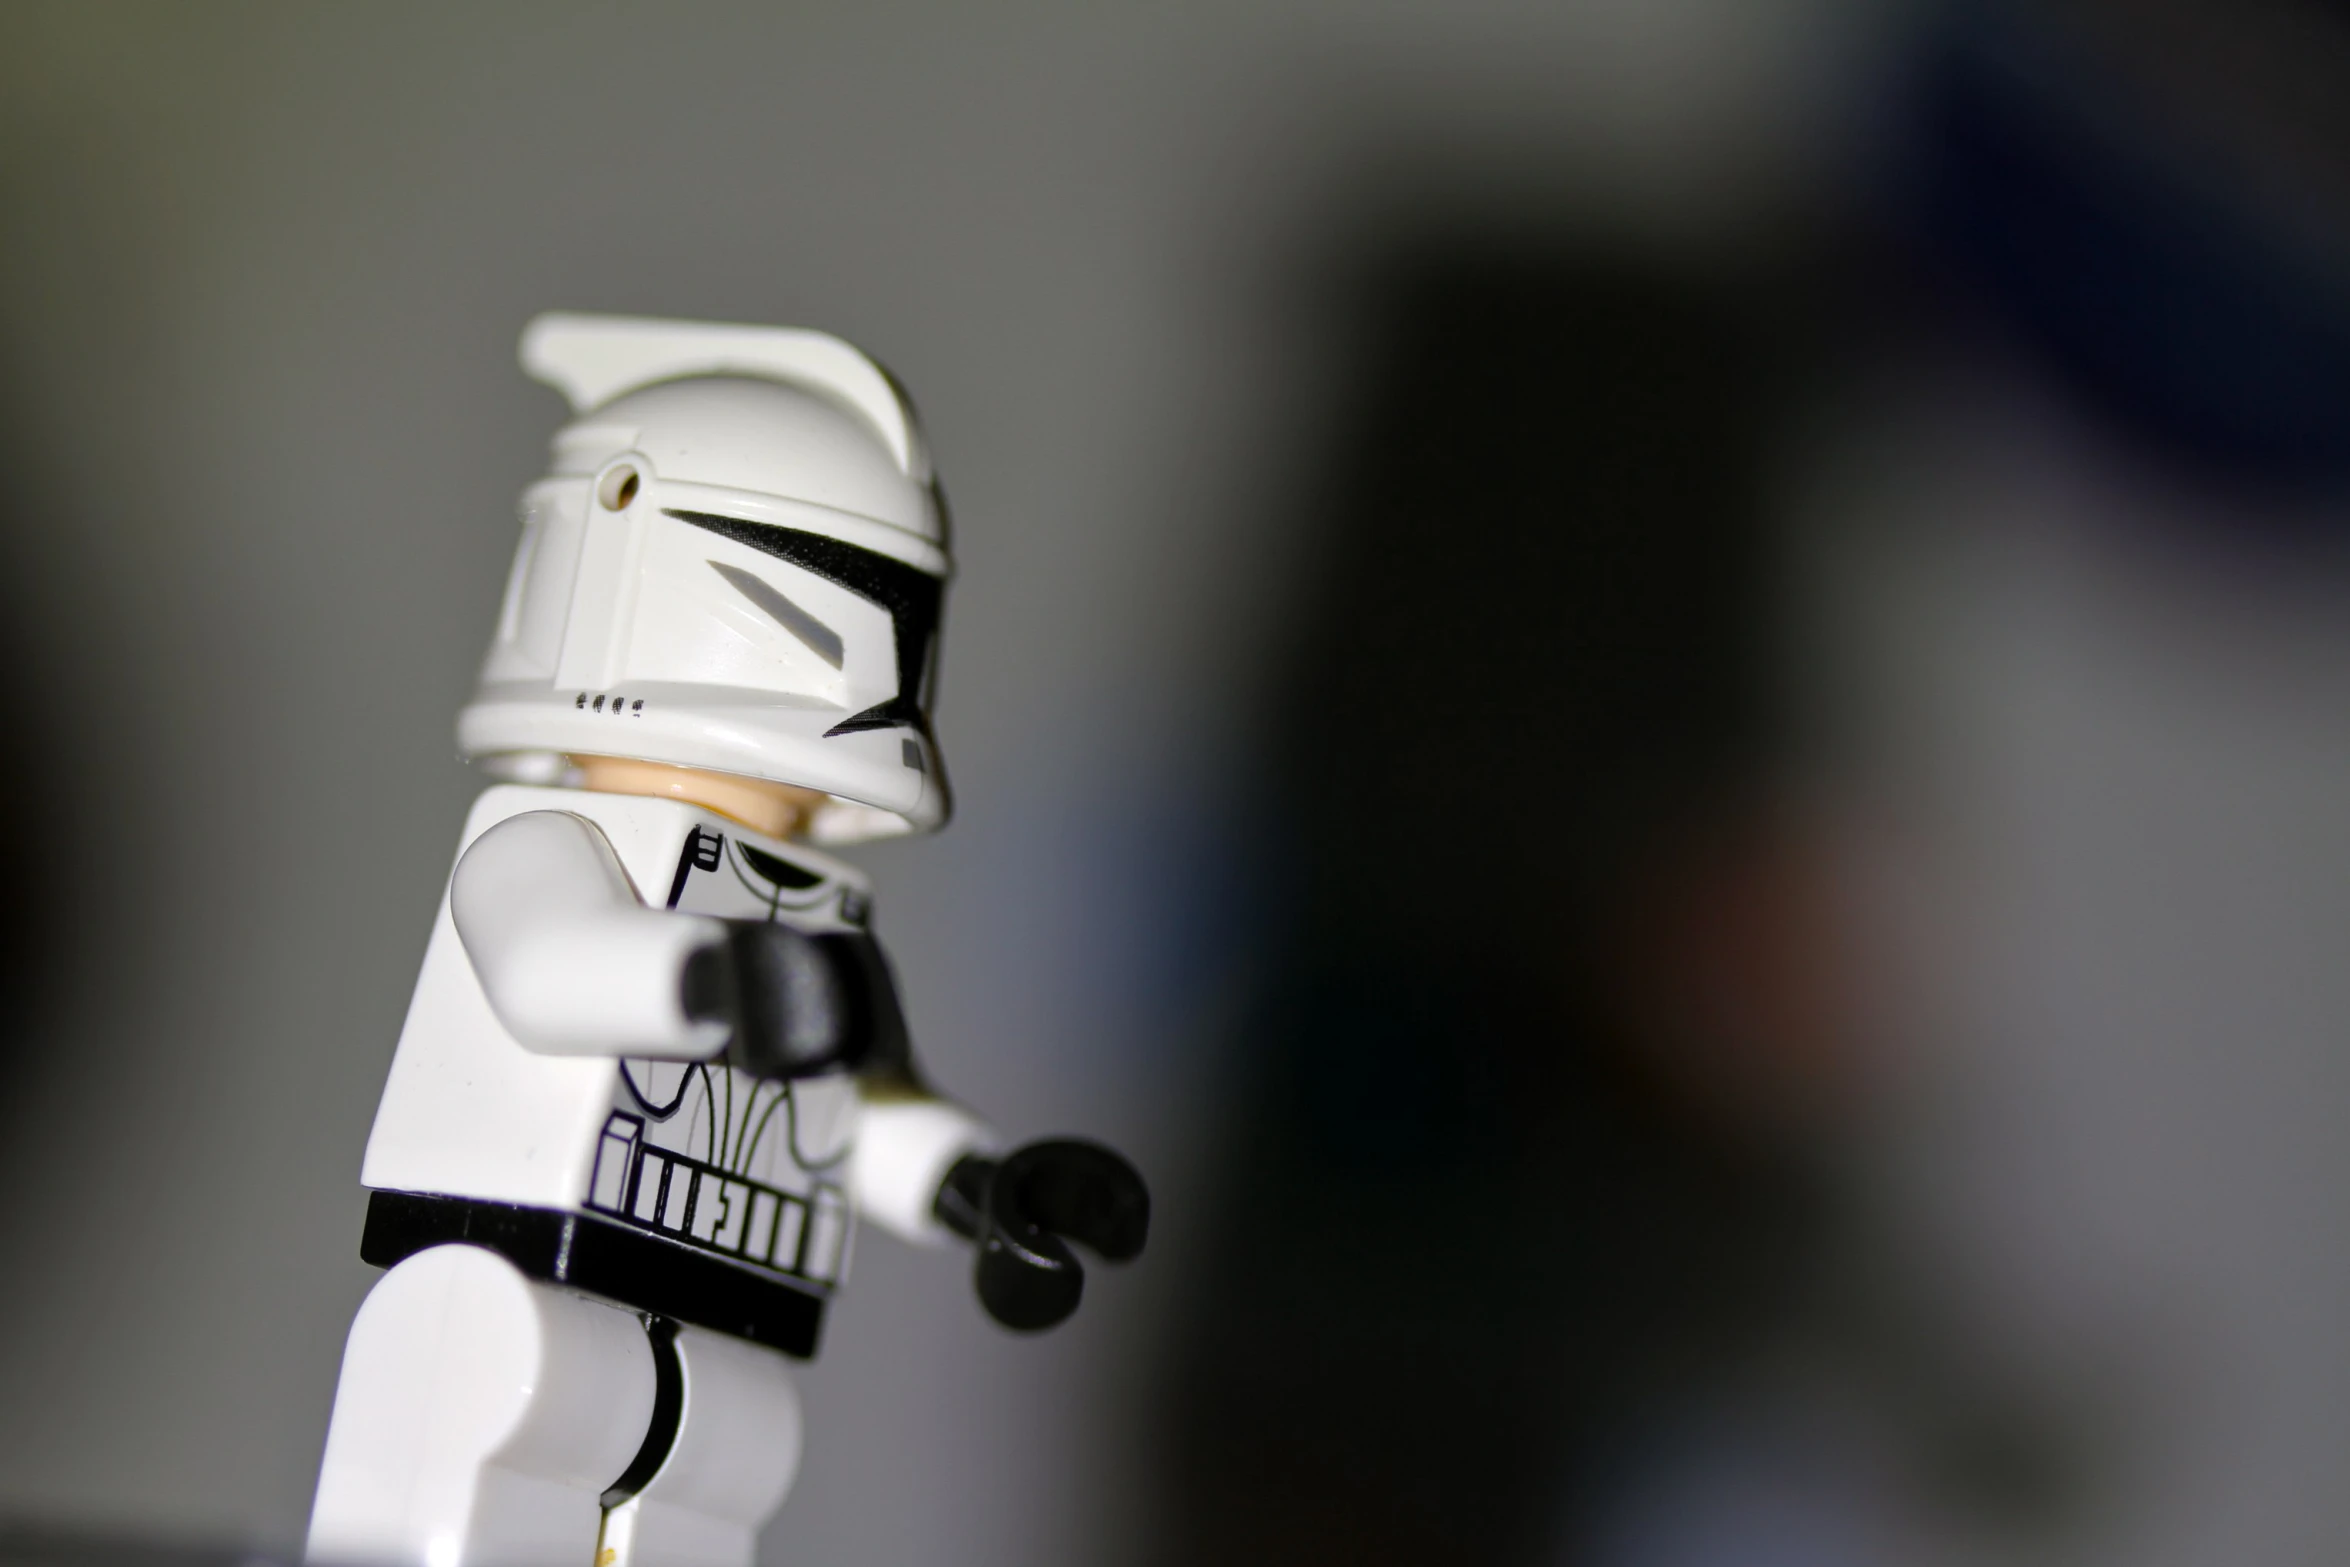 a lego storm trooper has a name on it